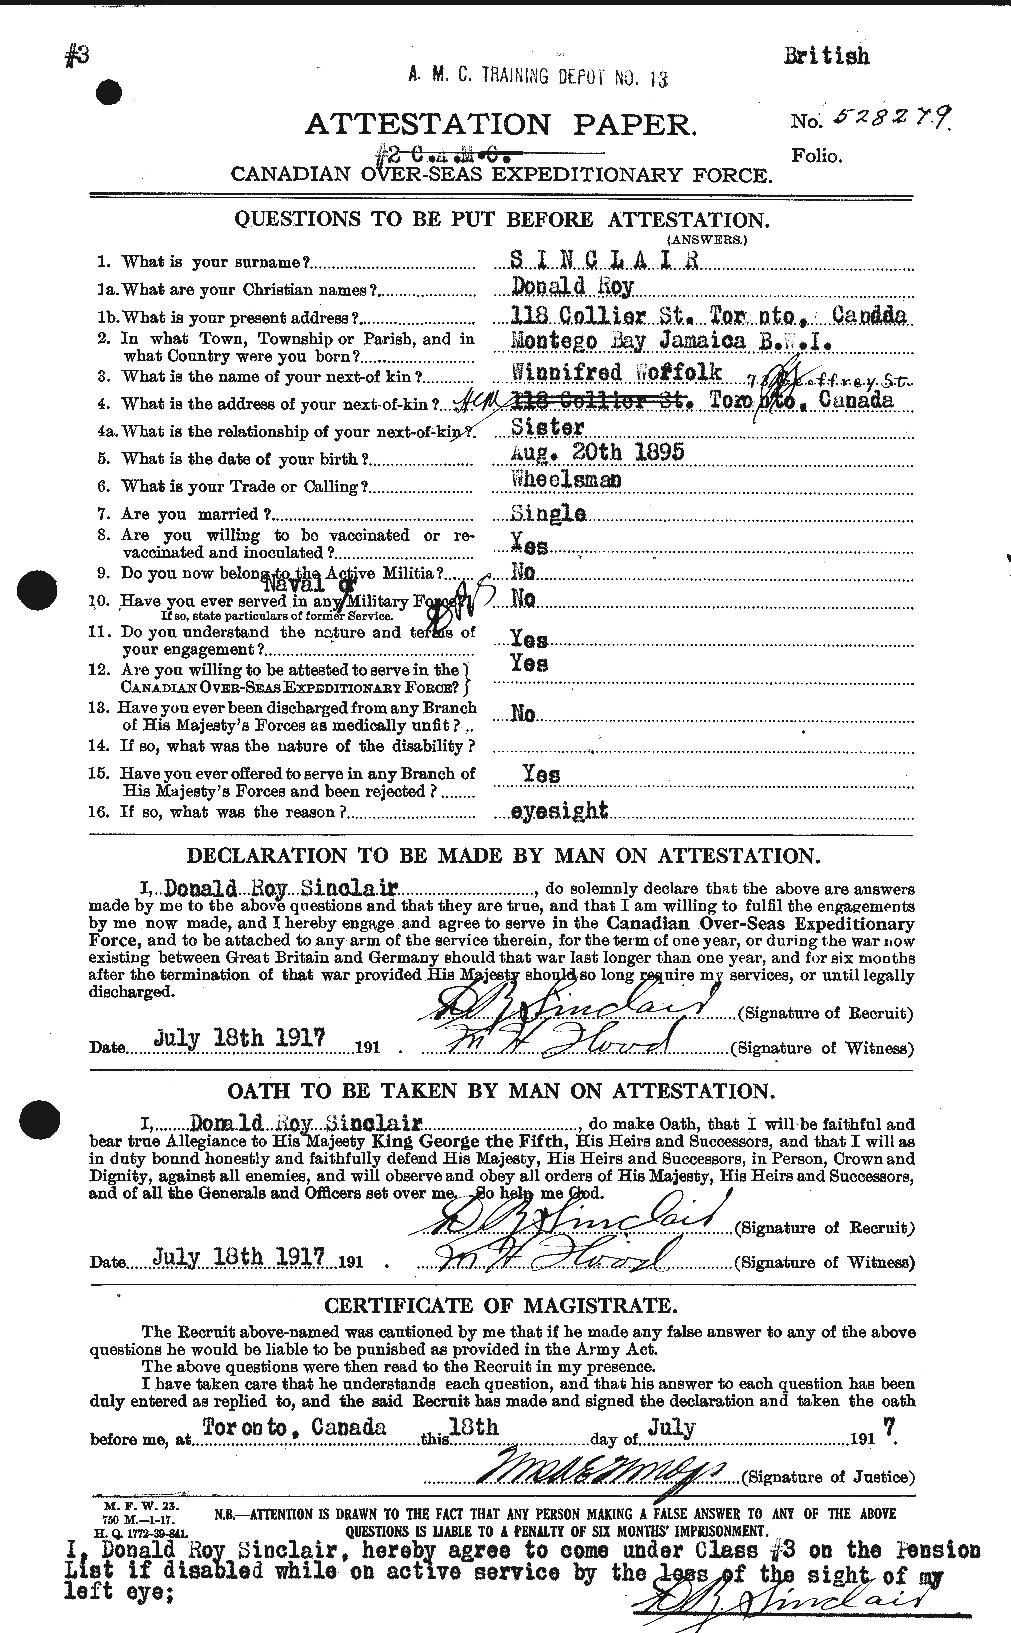 Personnel Records of the First World War - CEF 096107a